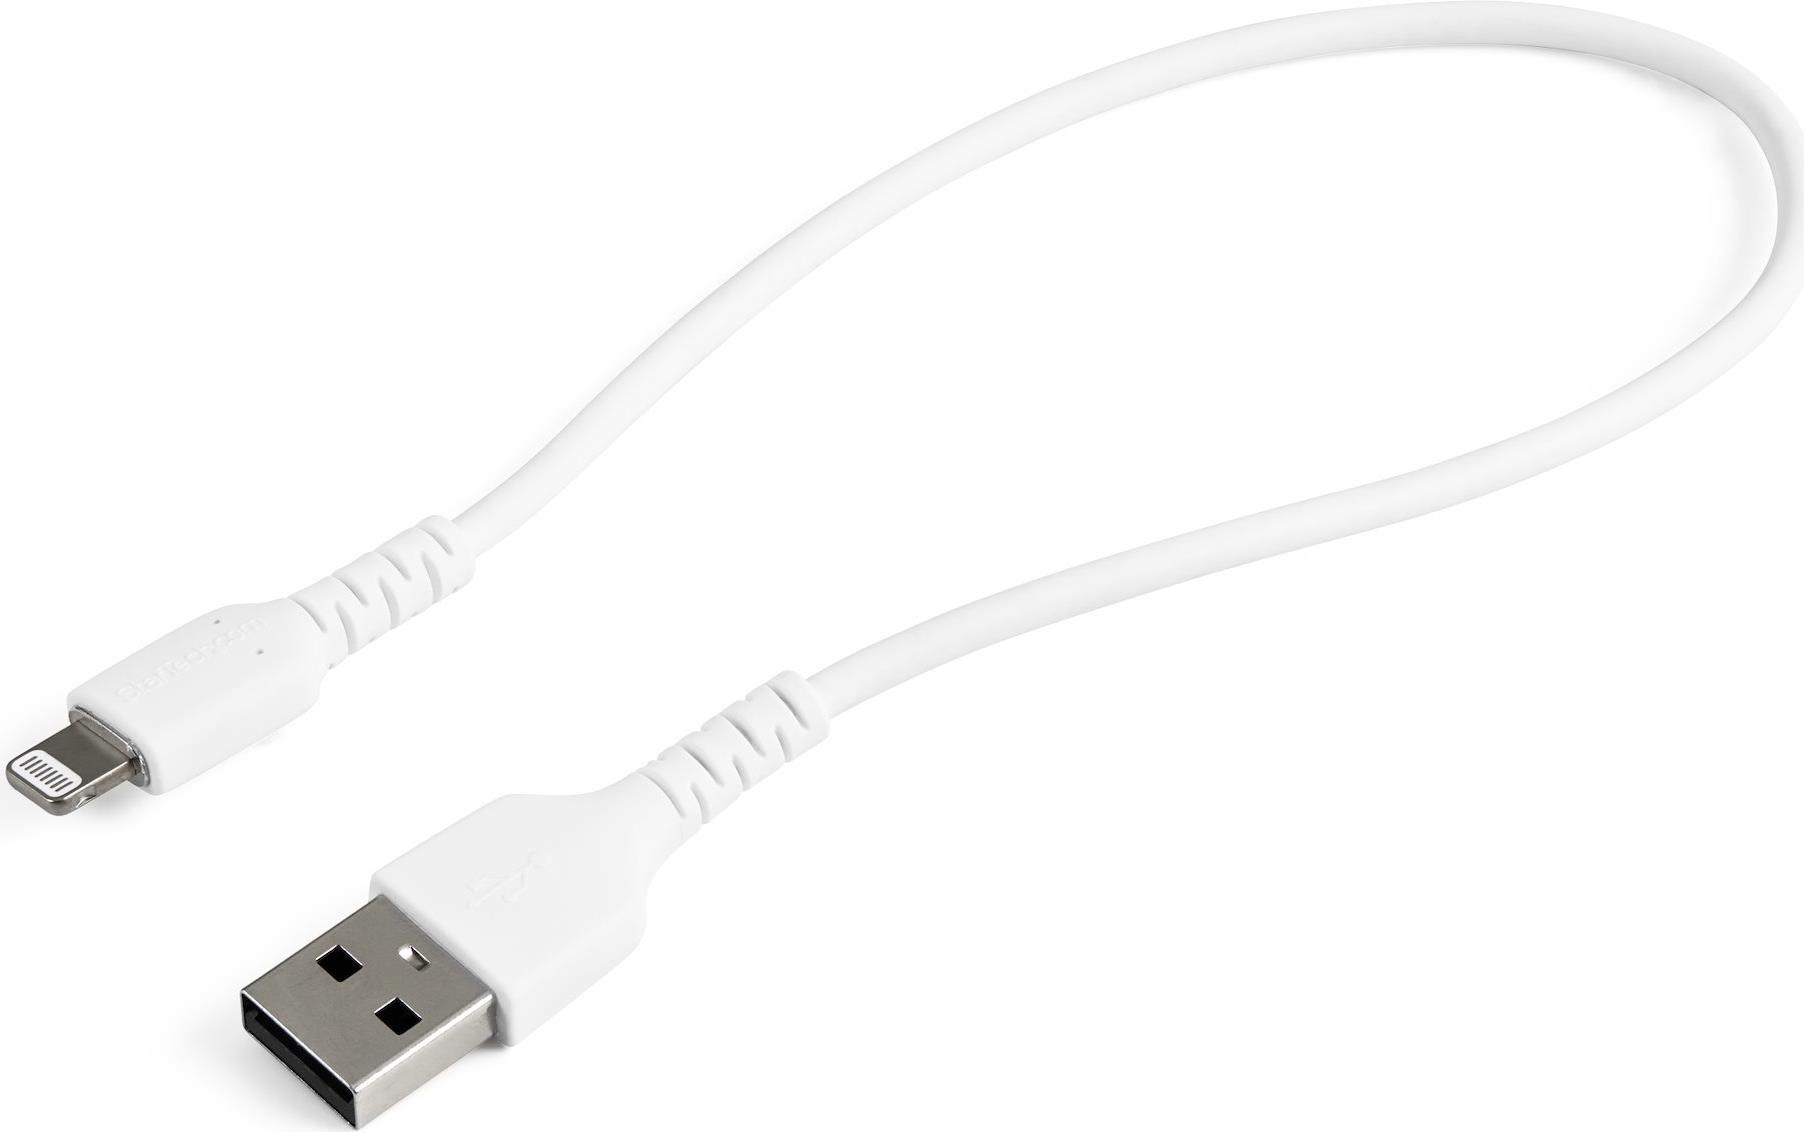 StarTech.com 12inch/30cm Durable White USB-A to Lightning Cable, Rugged Heavy Duty Charging/Sync Cable for Apple iPhone/iPad MFi Certified (RUSBLTMM30CMW) - Lightning-Kabel - USB (M) bis Lightning (M) - 30 cm - weiß - für Apple iPad/iPhone/iPod (Lightning)